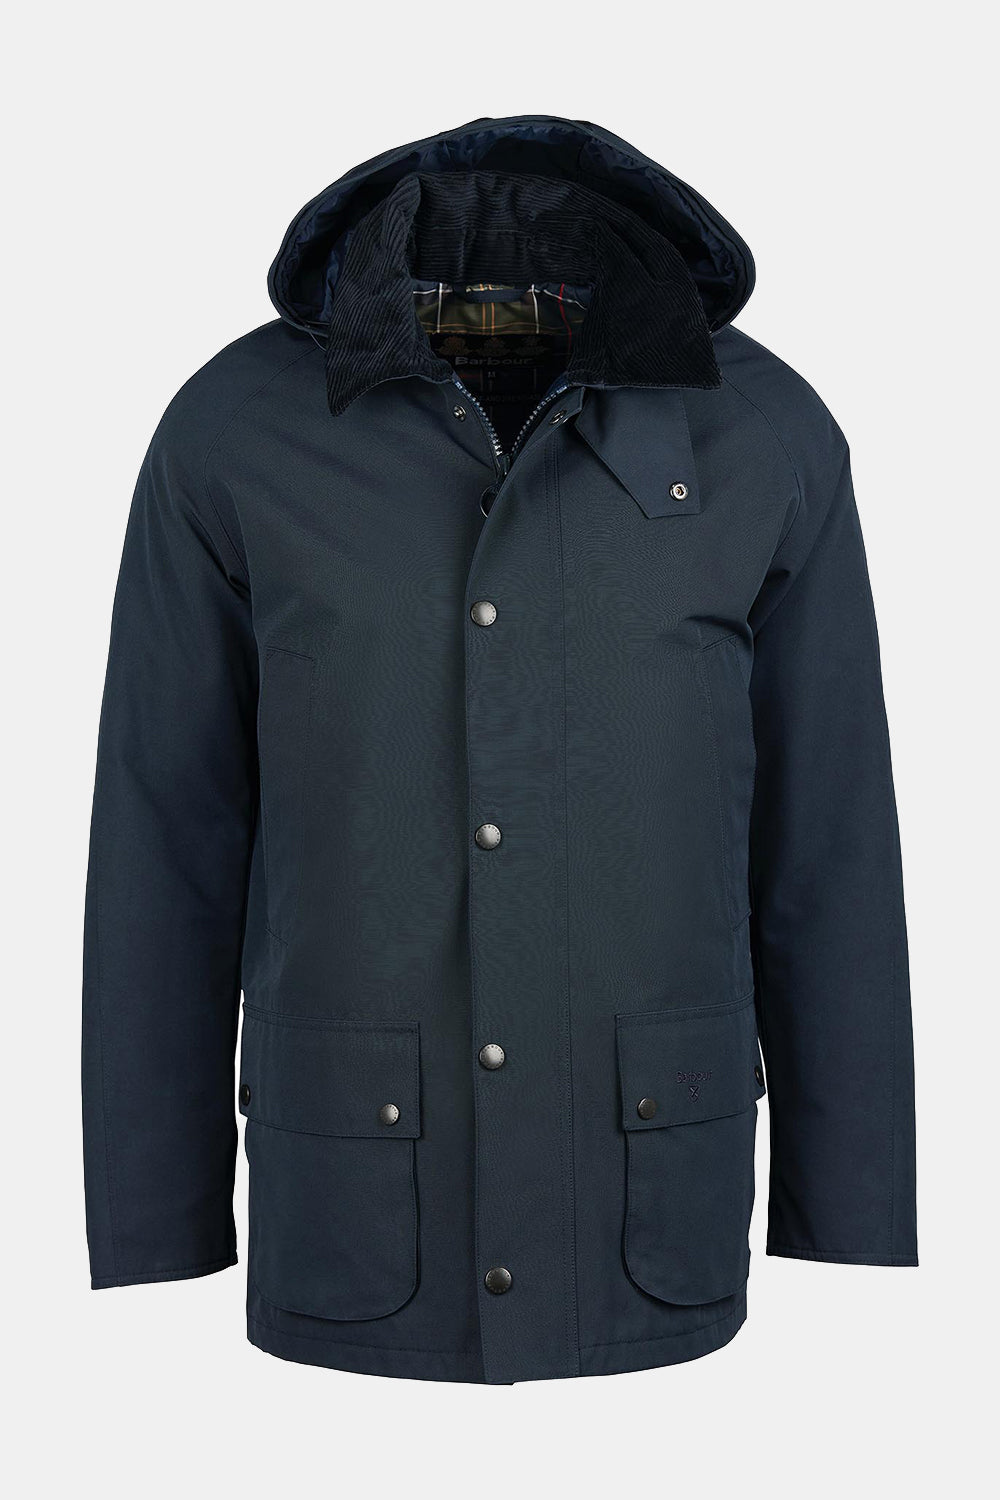 Barbour Winter Ashby Jacket (Navy)